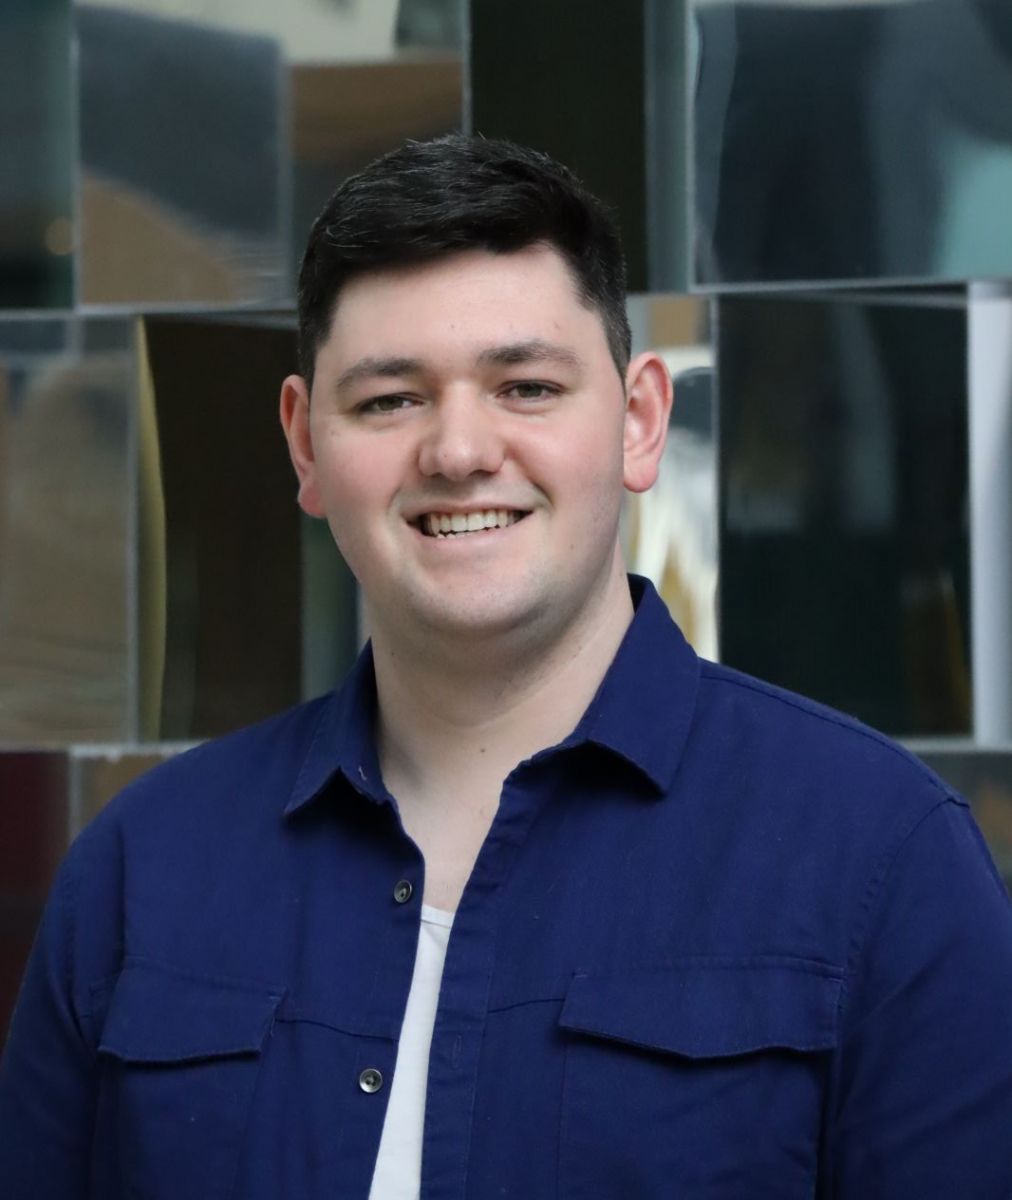 A headshot of Darragh. Darragh is smiling for the camera, he has short, dark hair and he is wearing a navy shirt